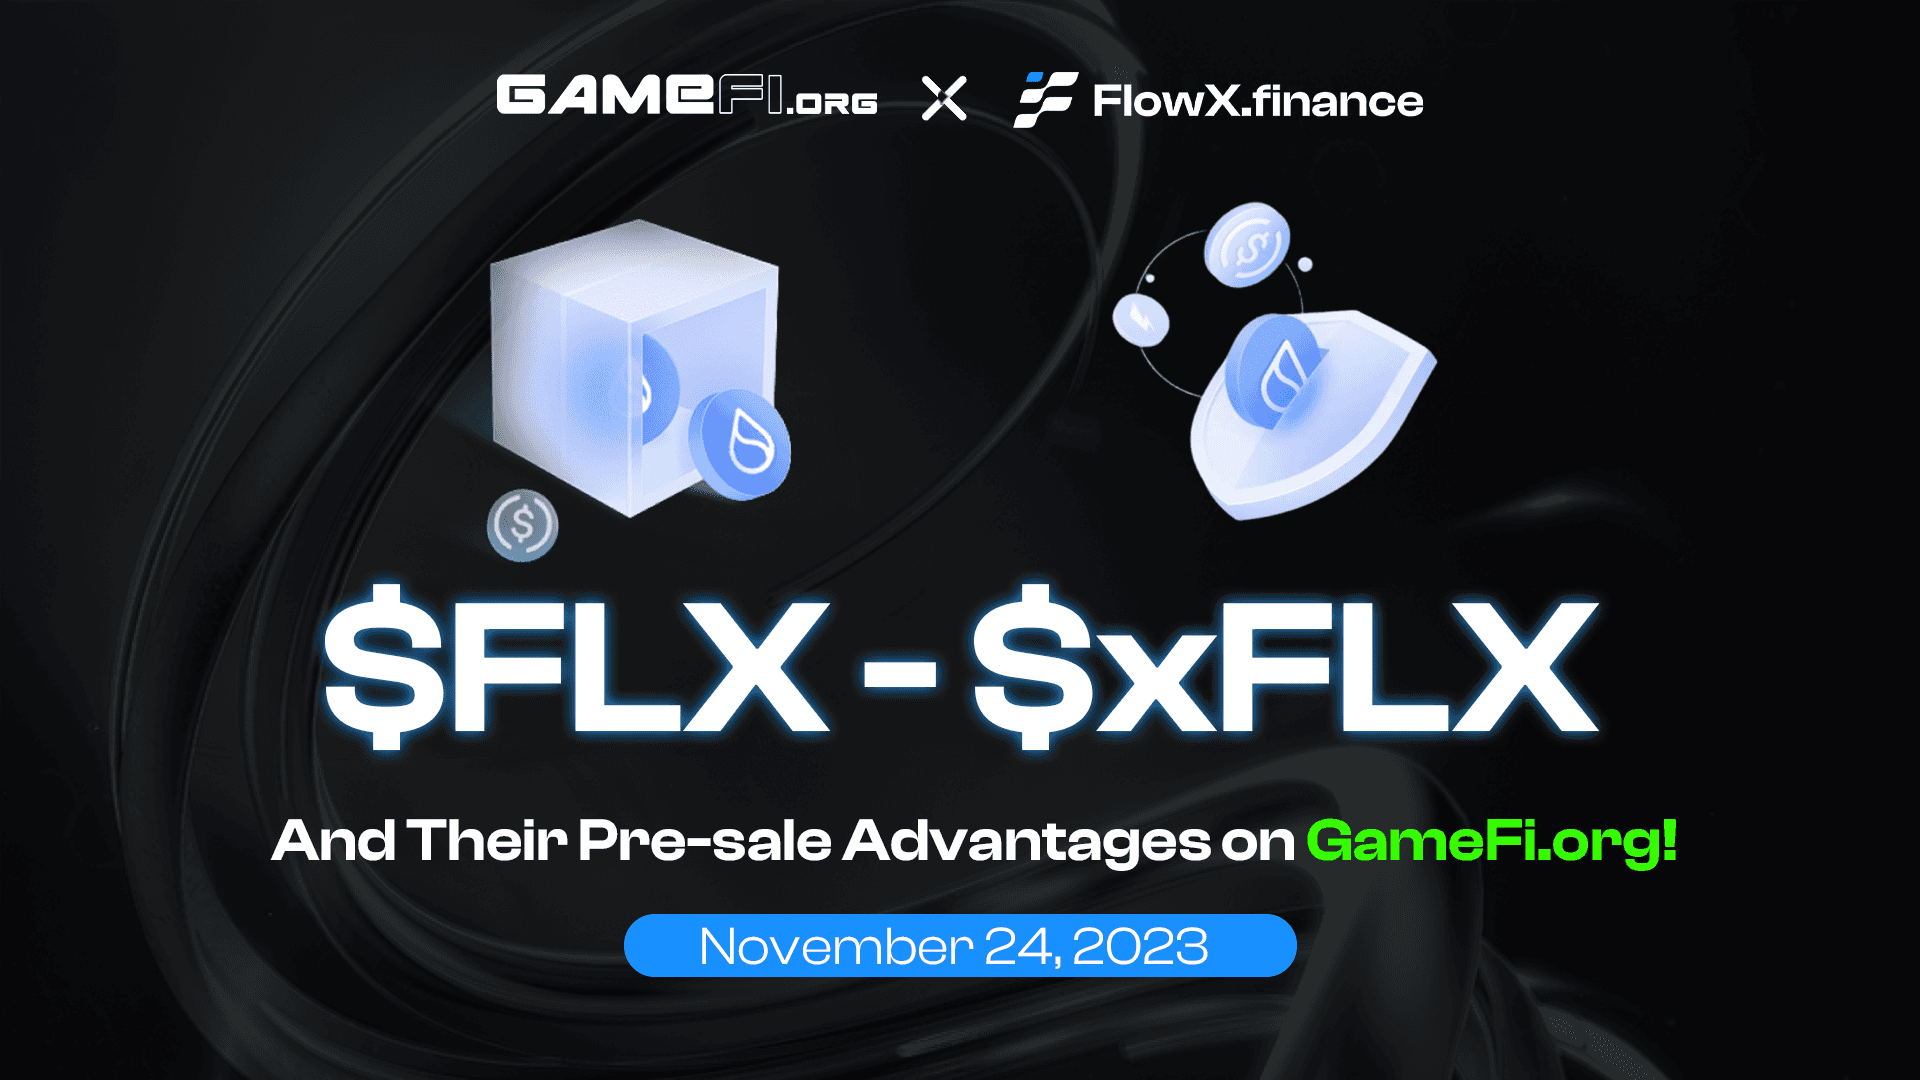 Understanding $FLX, $xFLX, and Pre-sale Advantages on GameFi.org.